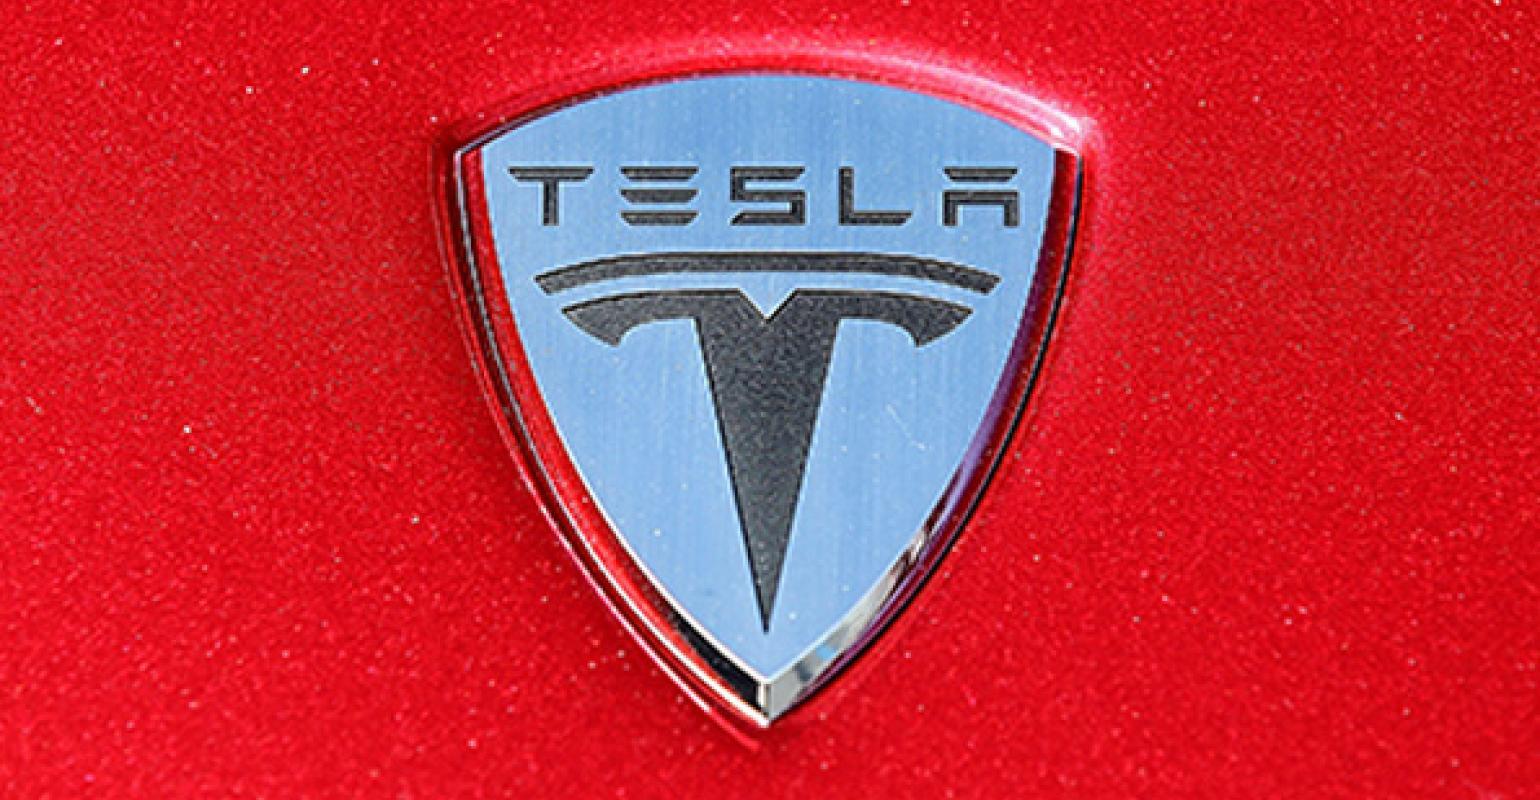 Chinese Blue and Red Logo - Tesla Plans $5 Billion Investment in Chinese Factory | IndustryWeek